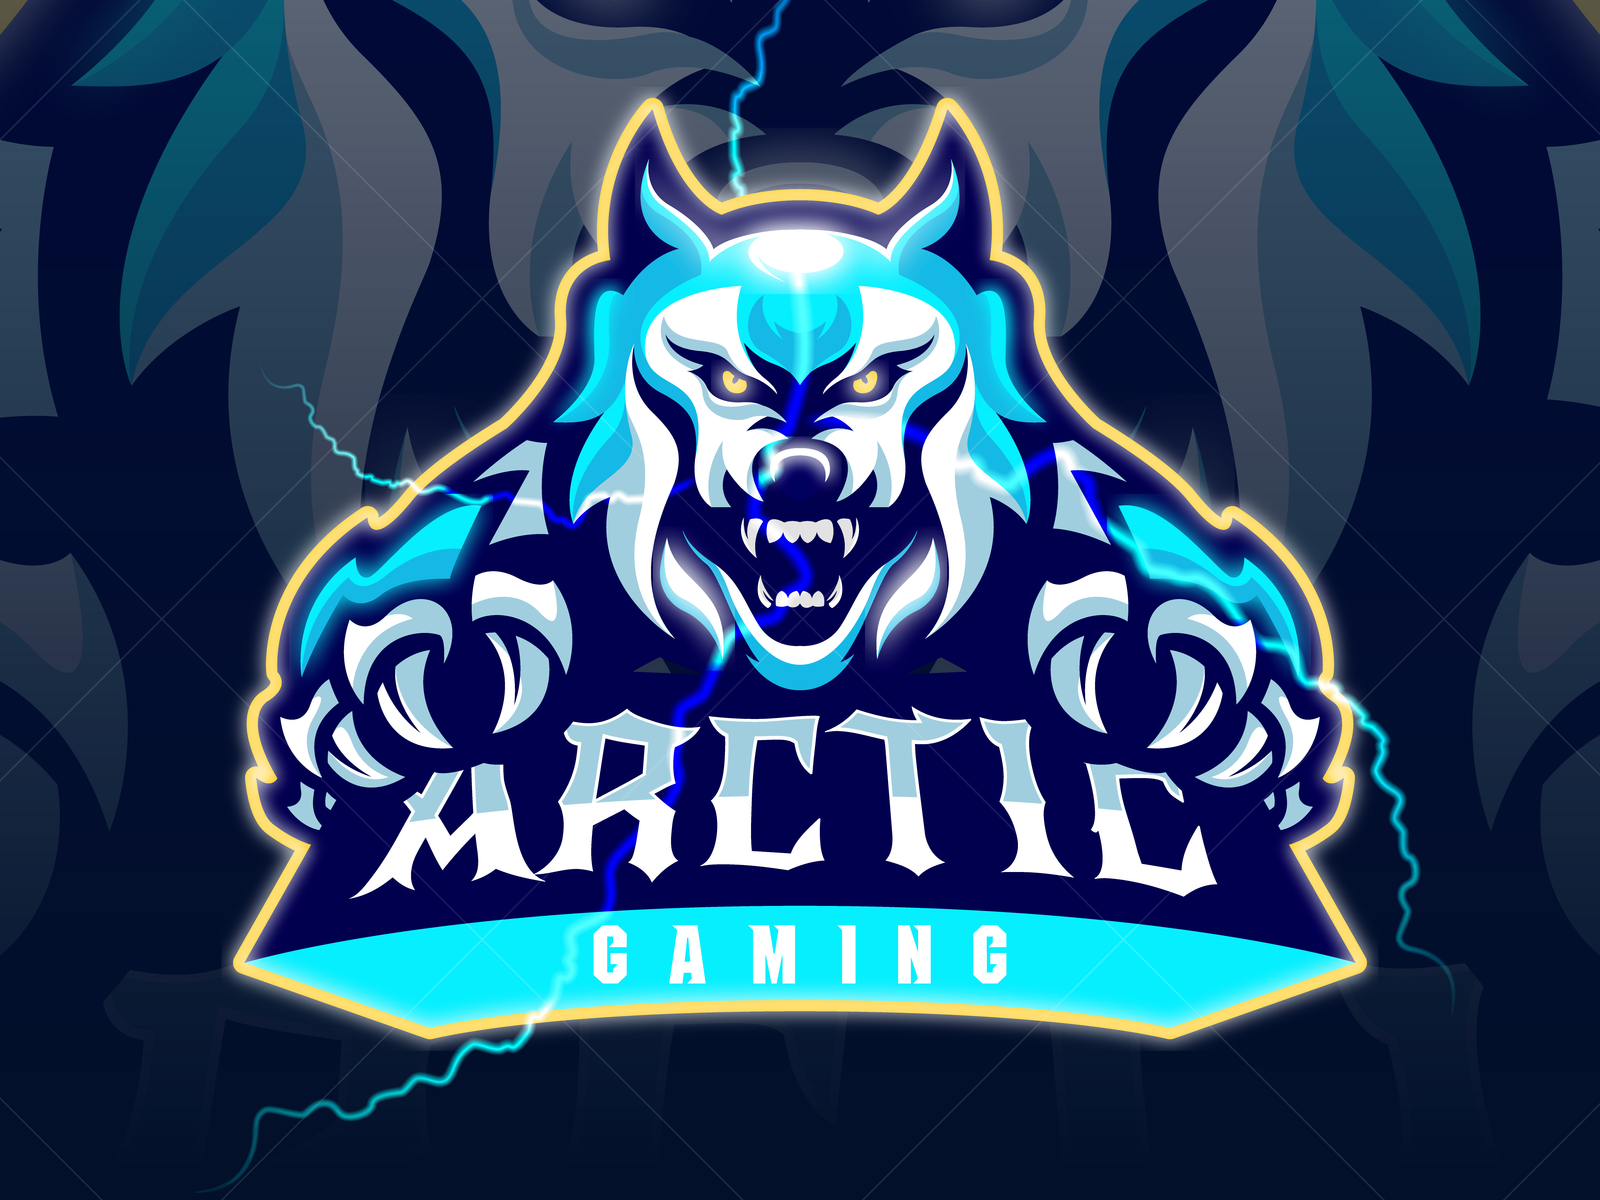 Arctic Gaming  E  Sport Logo  by Dadang Sudarno on Dribbble